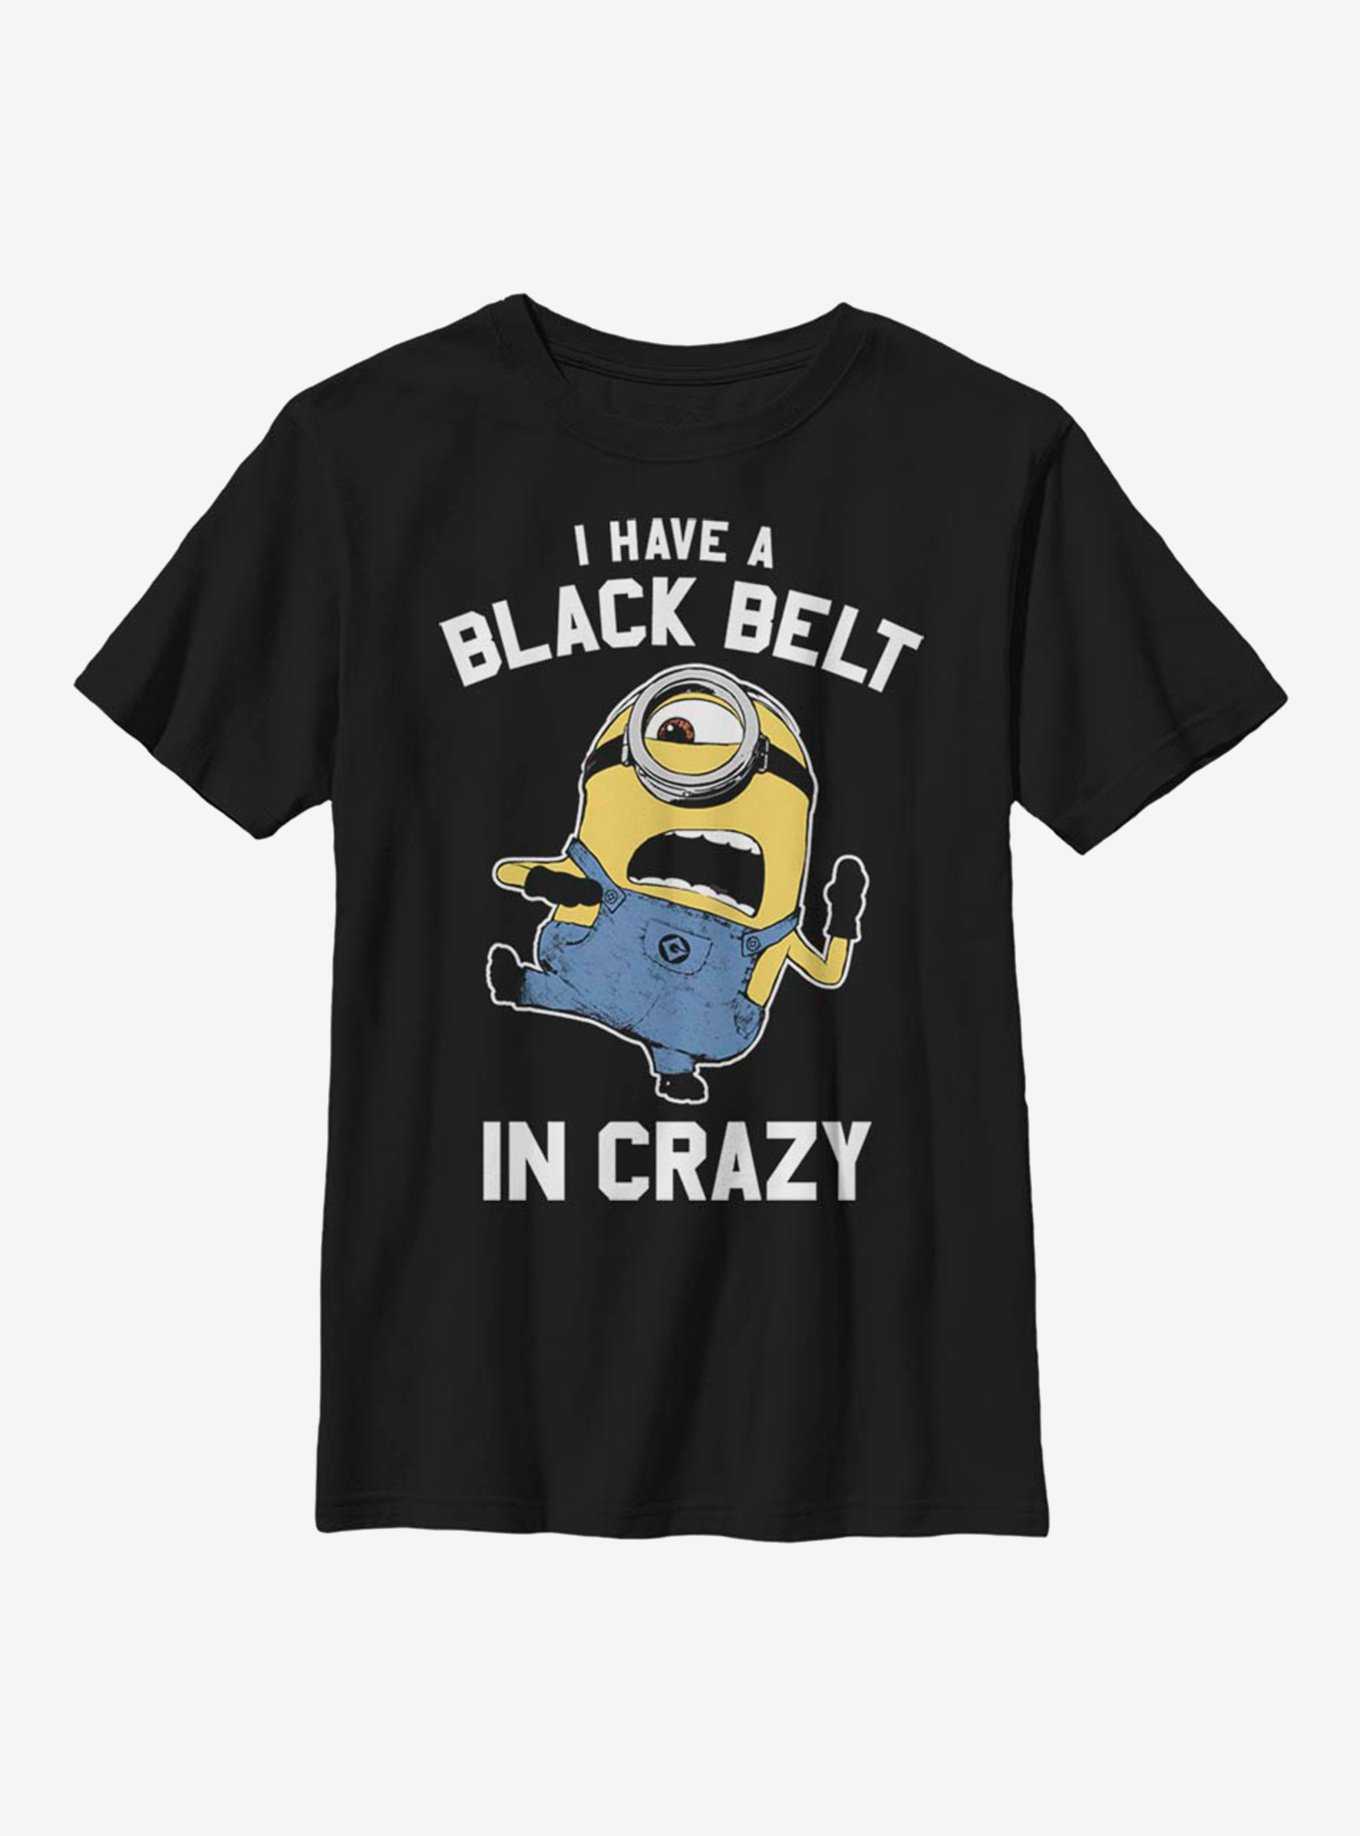 Despicable Me Minions Black Belt in Crazy Youth T-Shirt, , hi-res